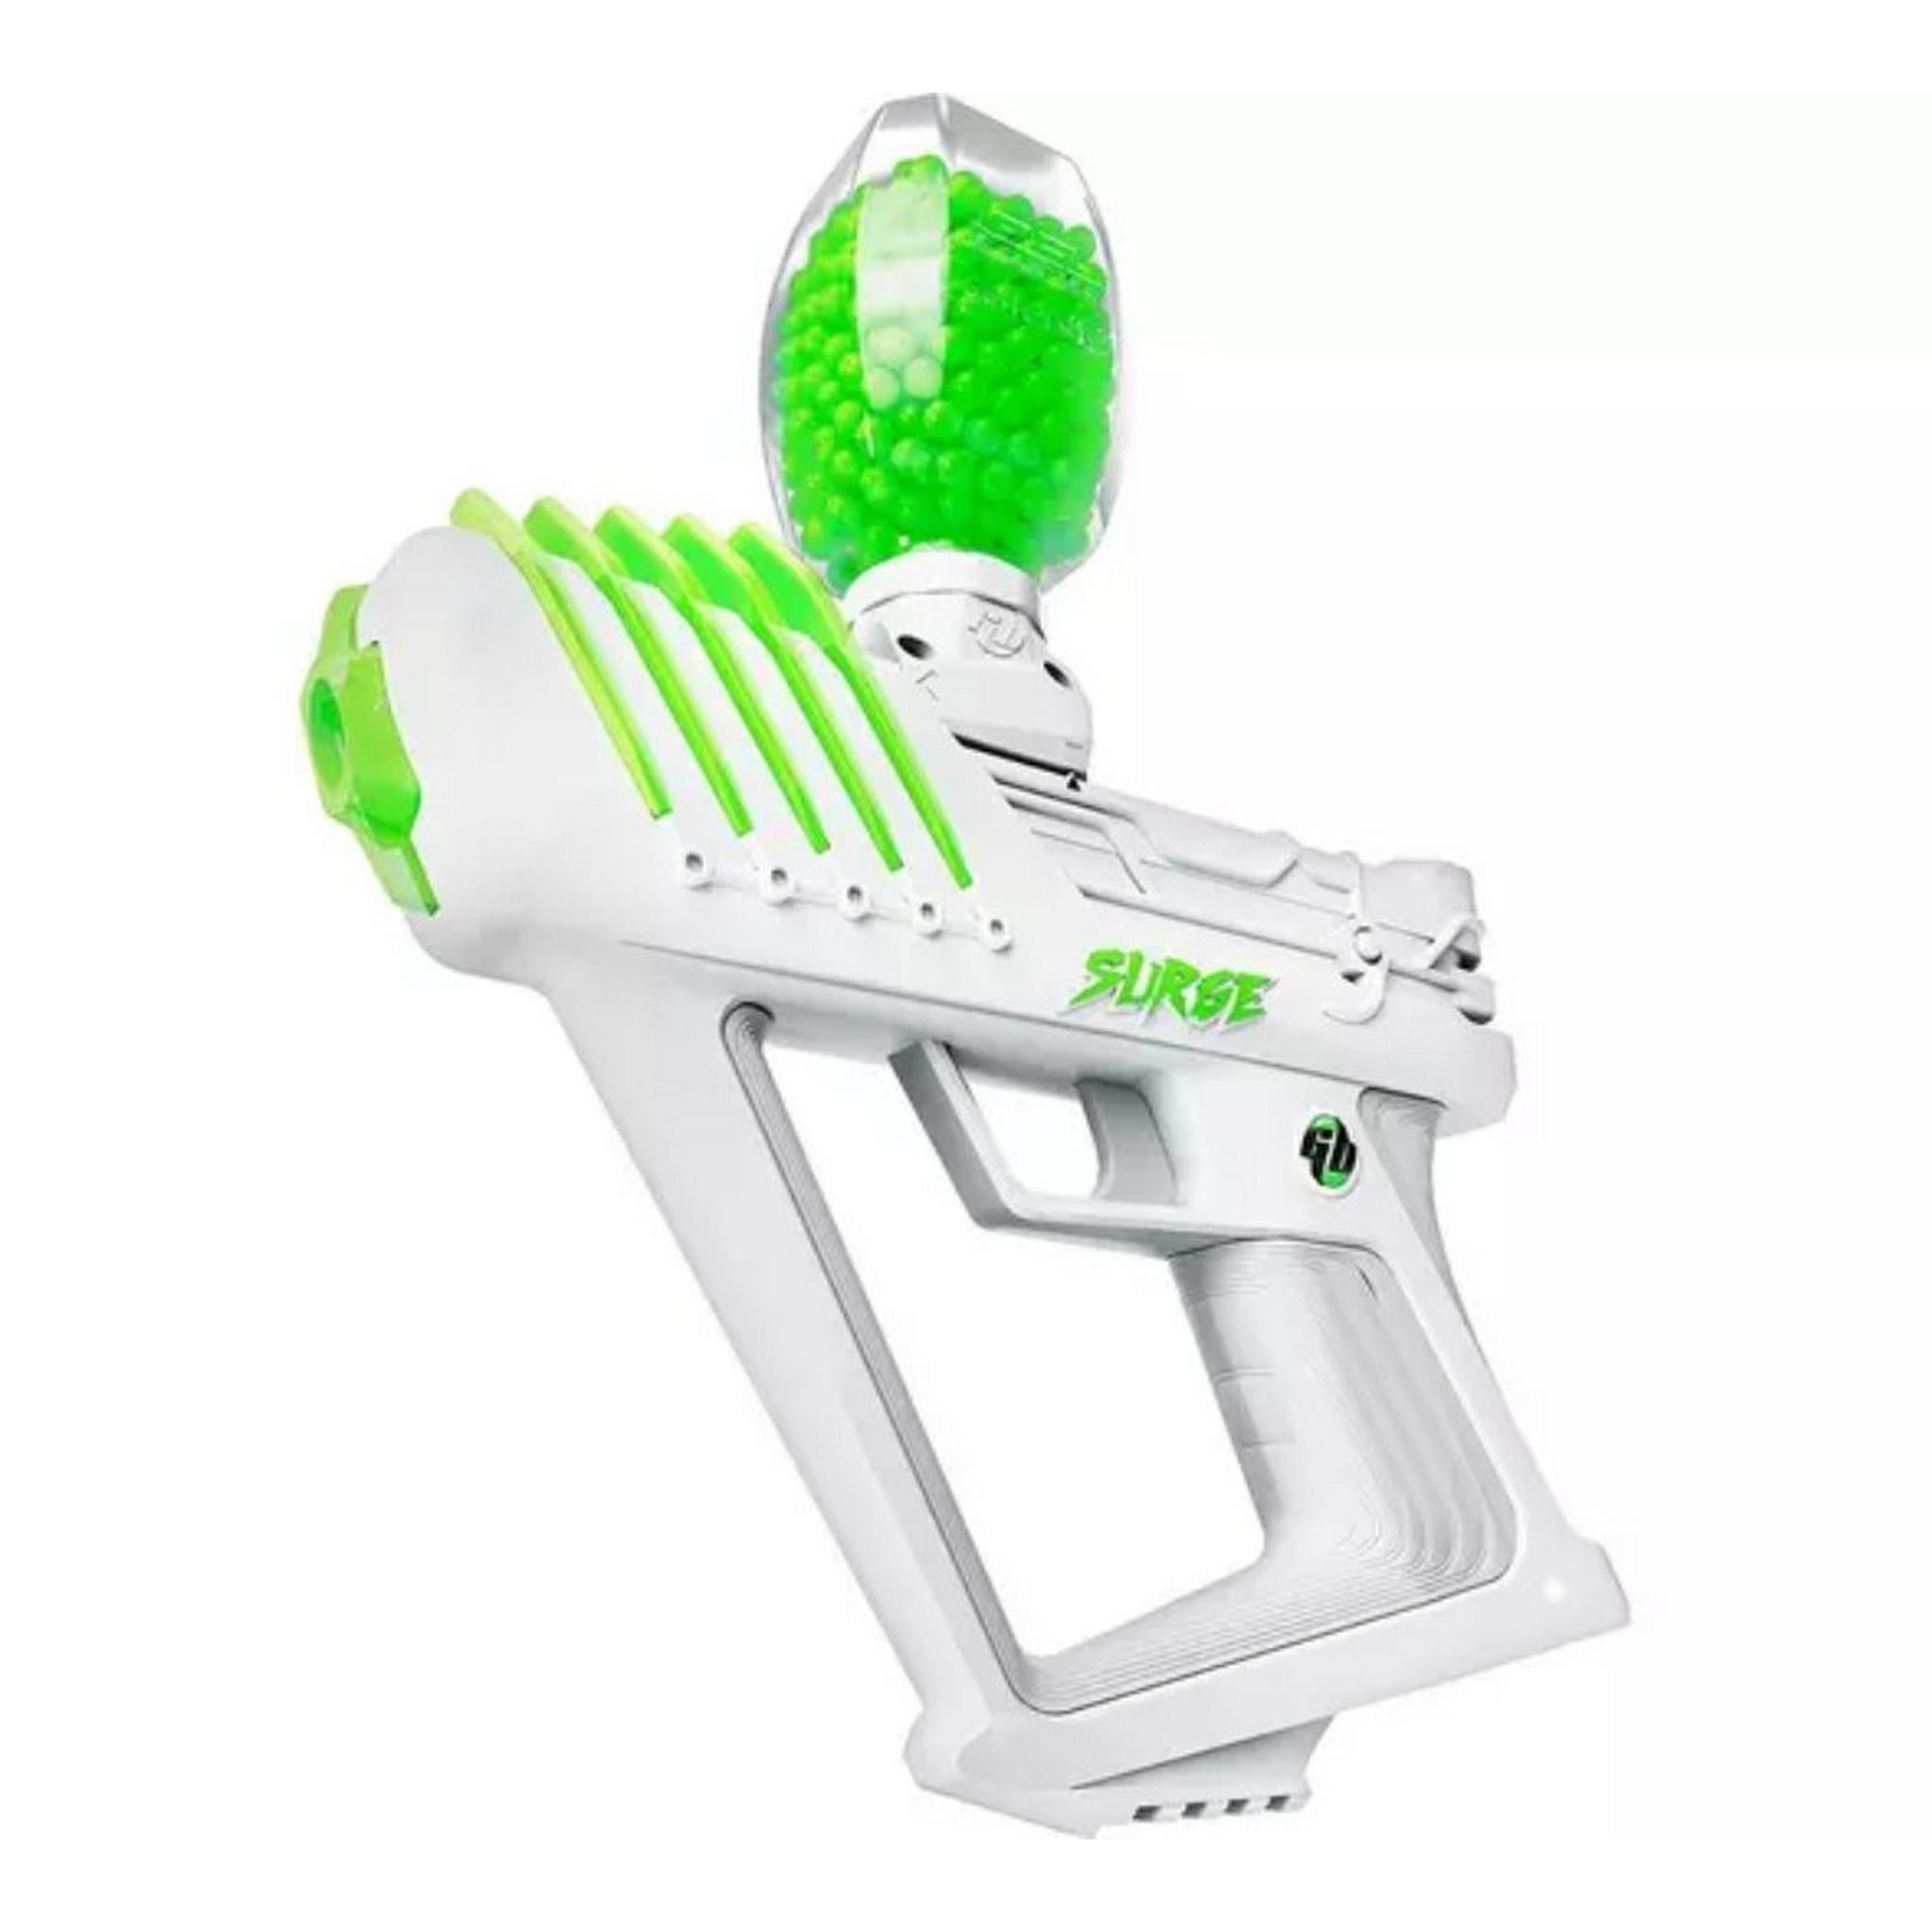 Gel Blaster Surge Fully Automatic Rechargable Blaster with 10,000 Pellets, GBSG1809-5L – White& Green